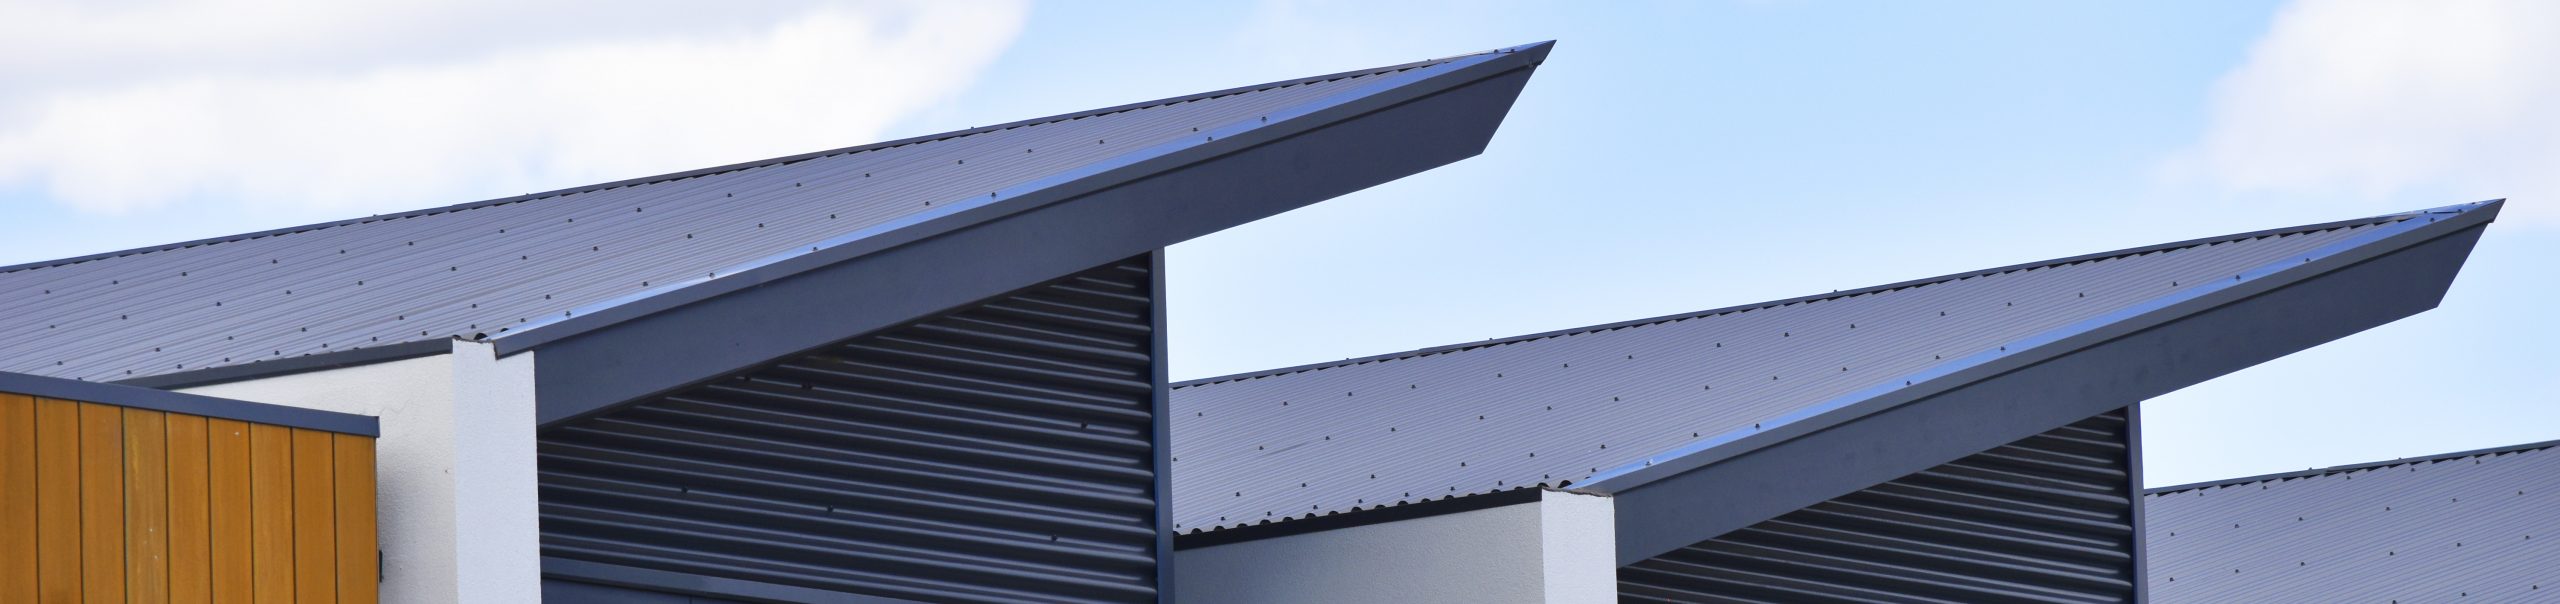 Steel Roofing & Re-Roofing Adelaide